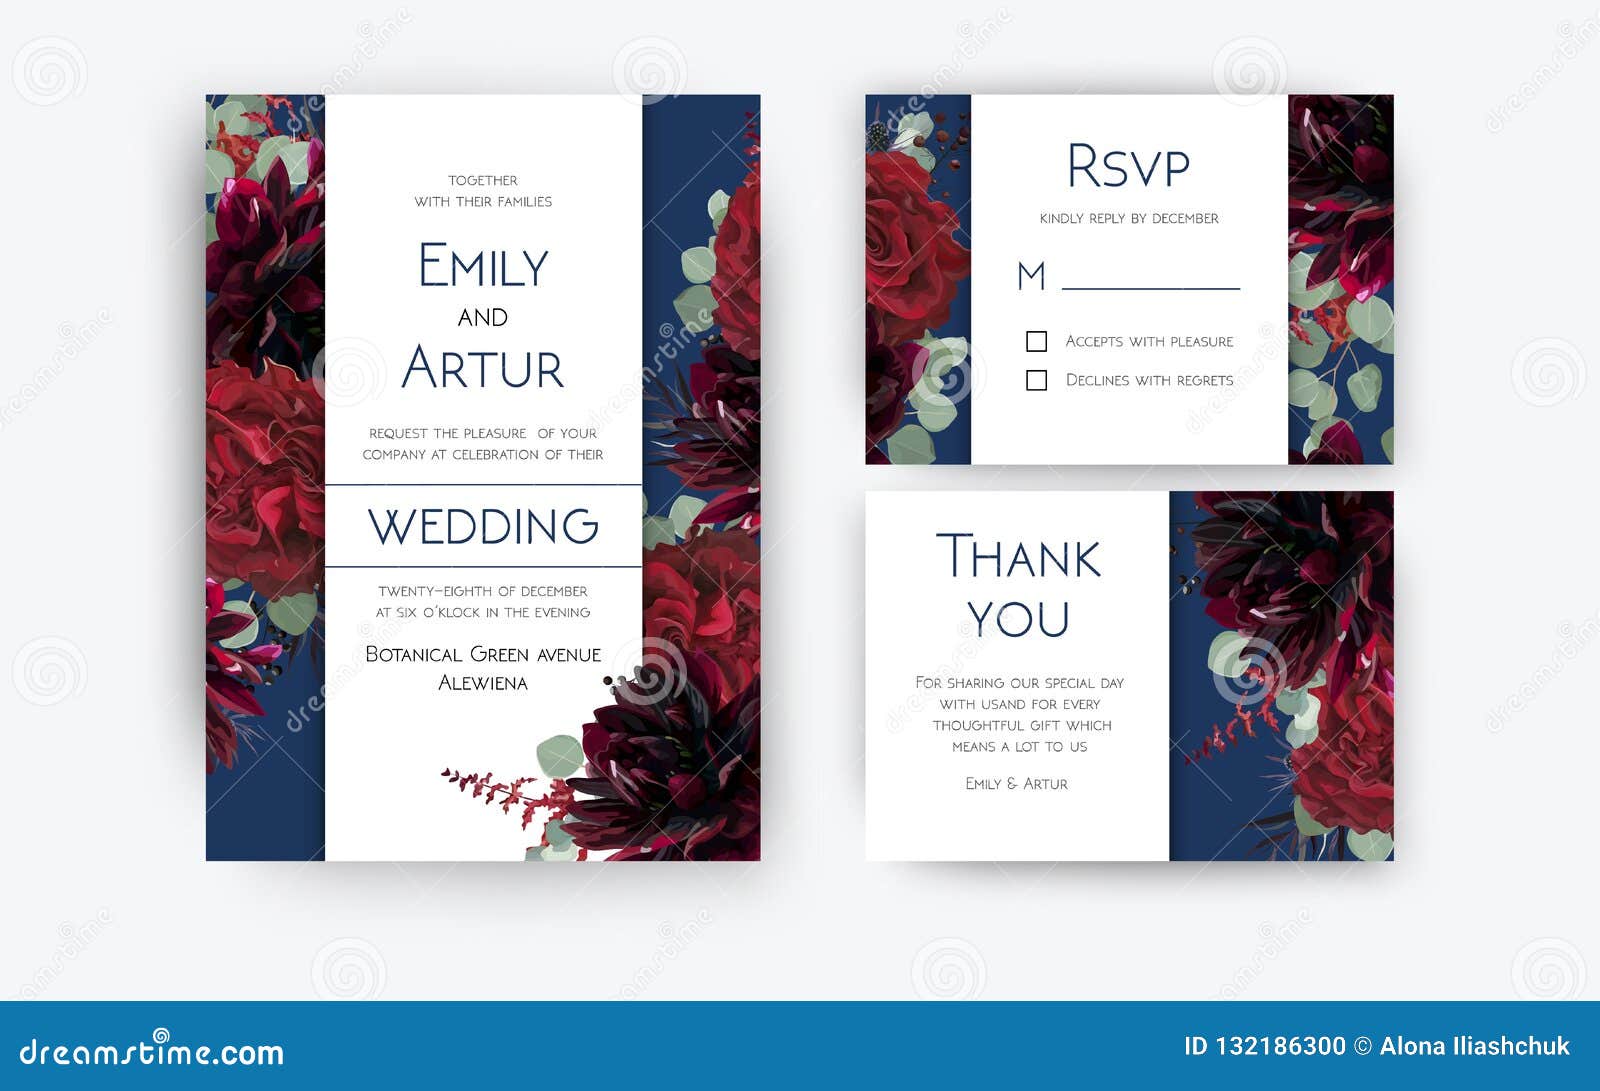 wedding invite invitation, rsvp, thank you card floral color . red rose flowers, dahlias, eucalyptus silver dollar branches